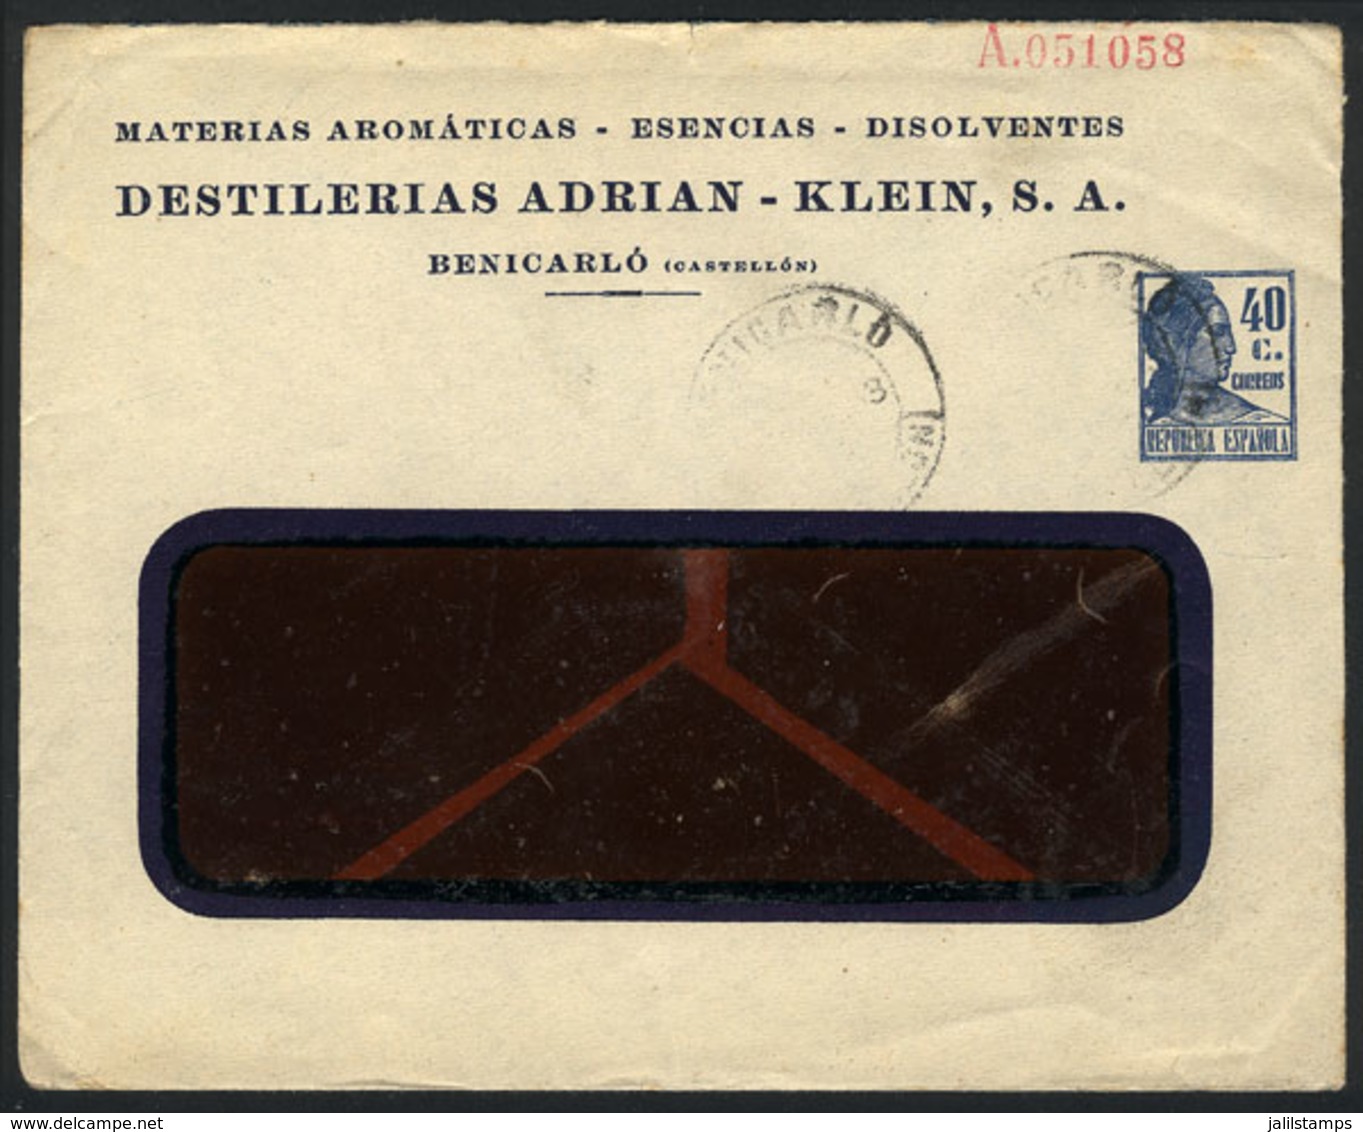 1227 SPAIN: Private Stationery Envelope Of 40c. Of Adrián-Klein Distillery, Of Benicarló (Castellón), Sent To Argentina  - 1931-....